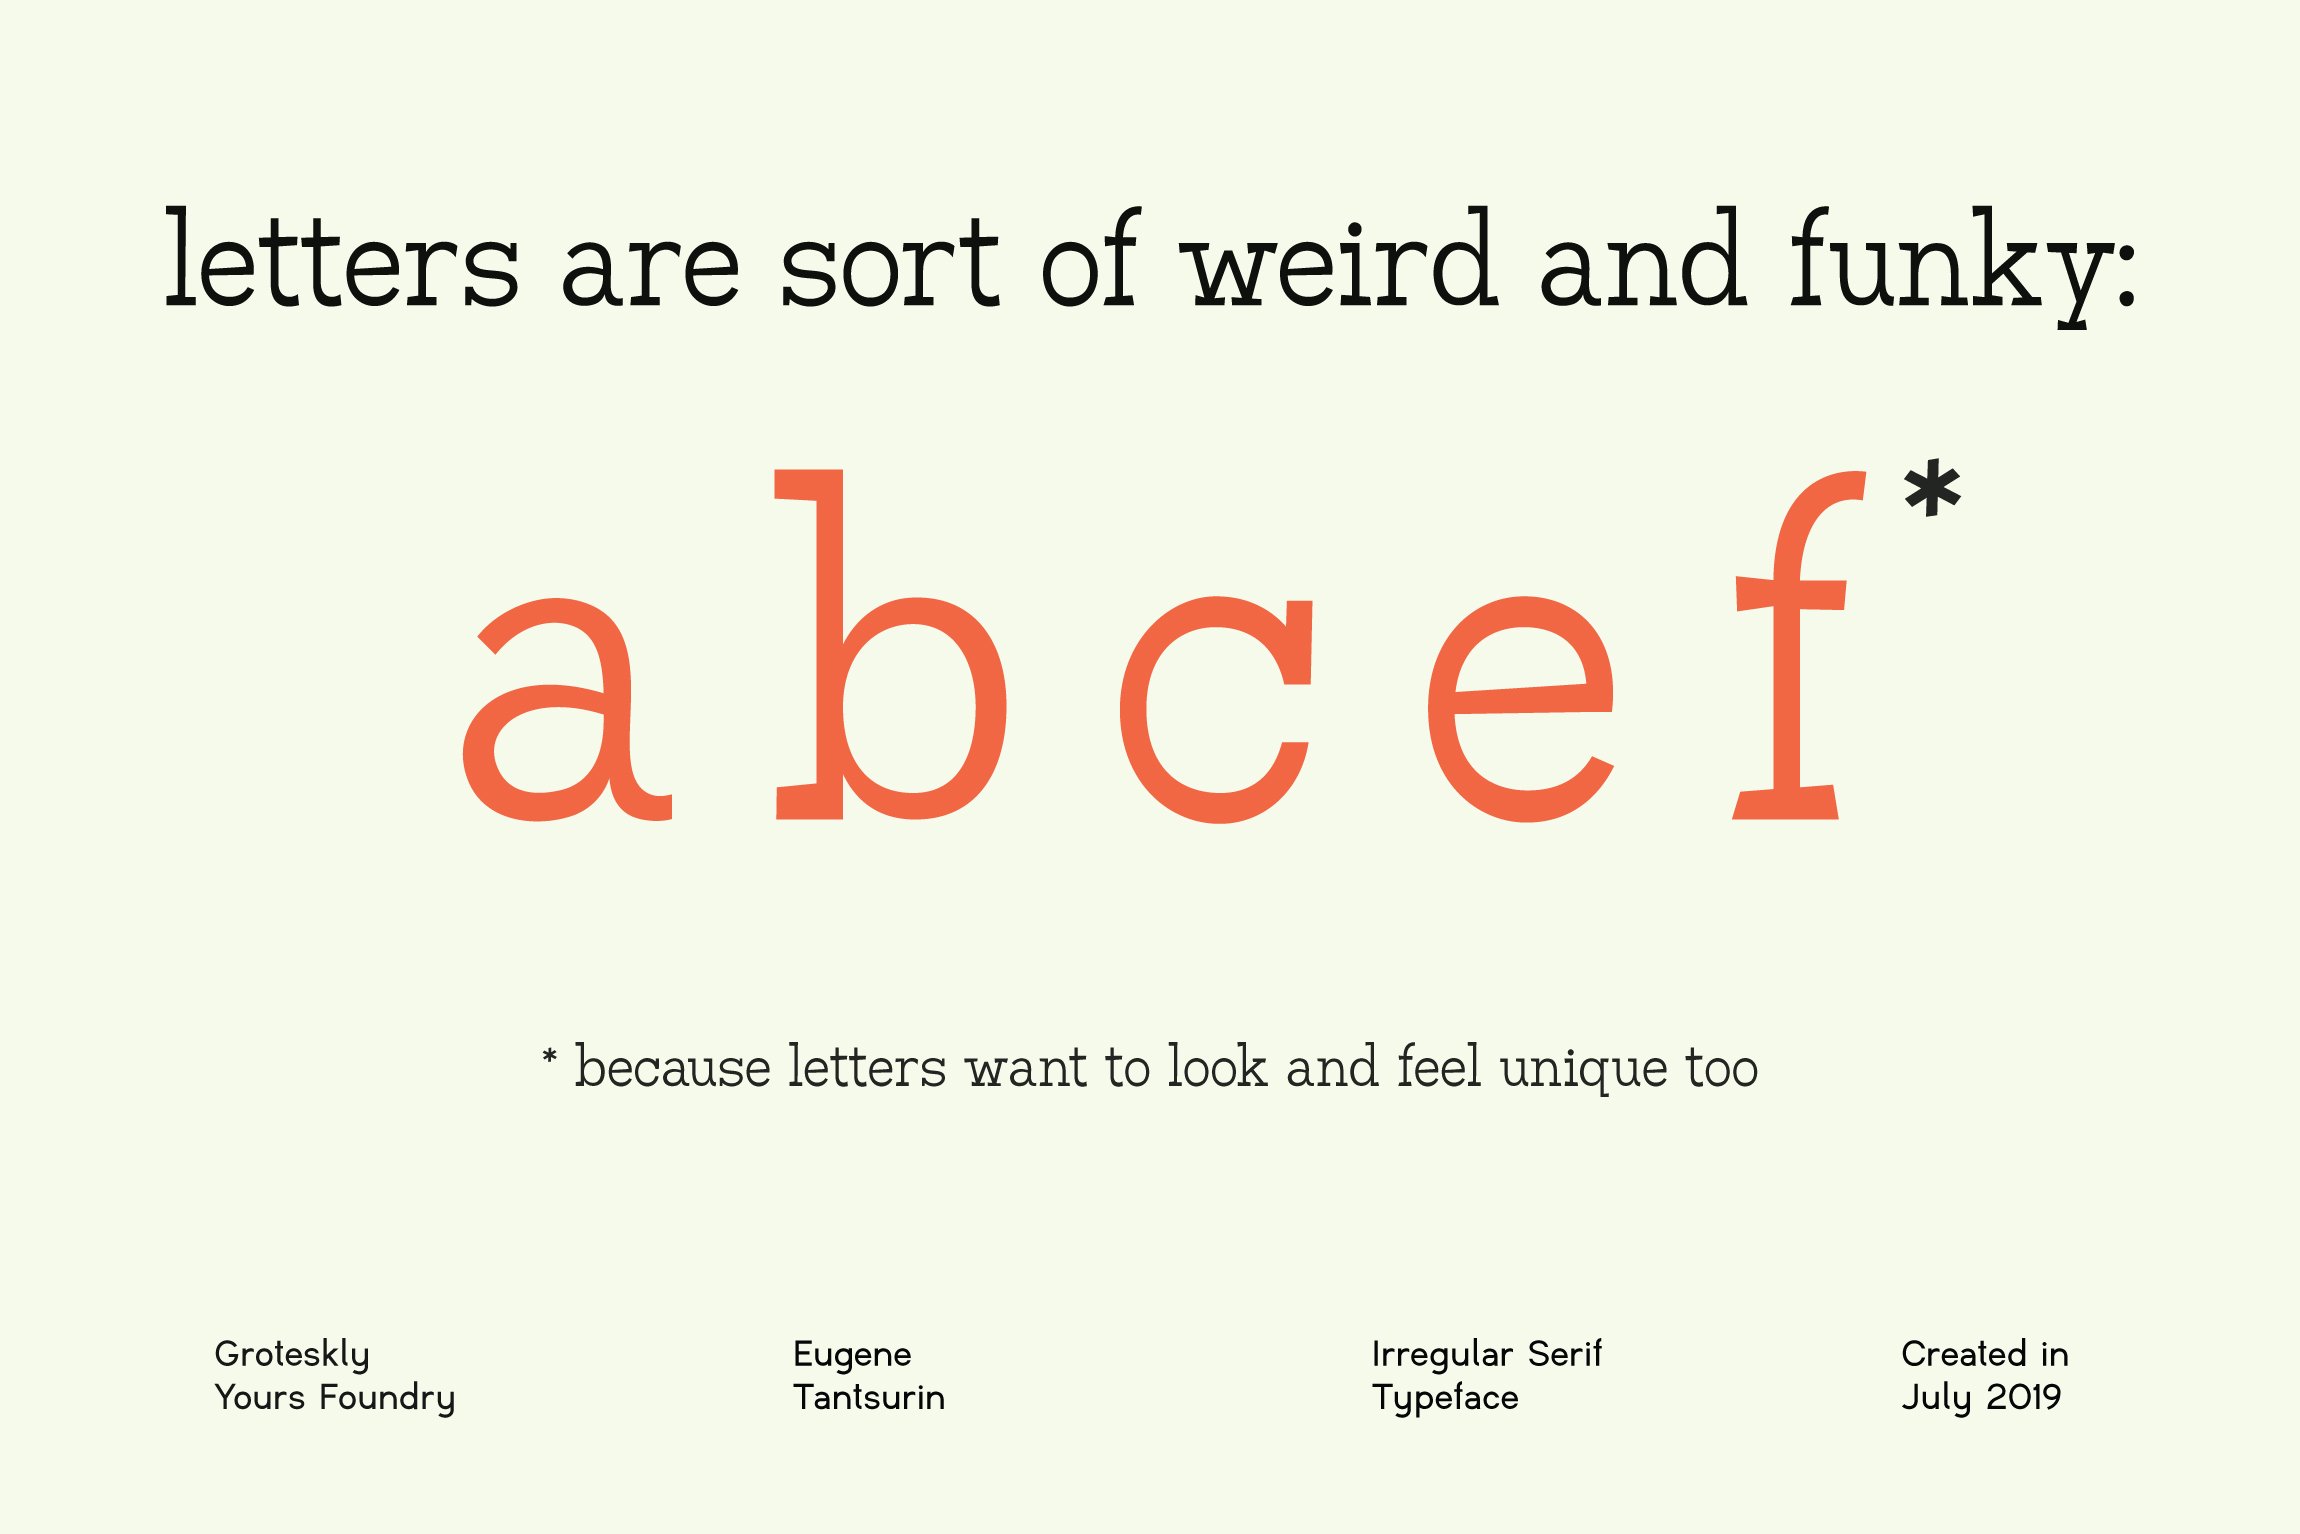 Letters are sort of weird and funky.